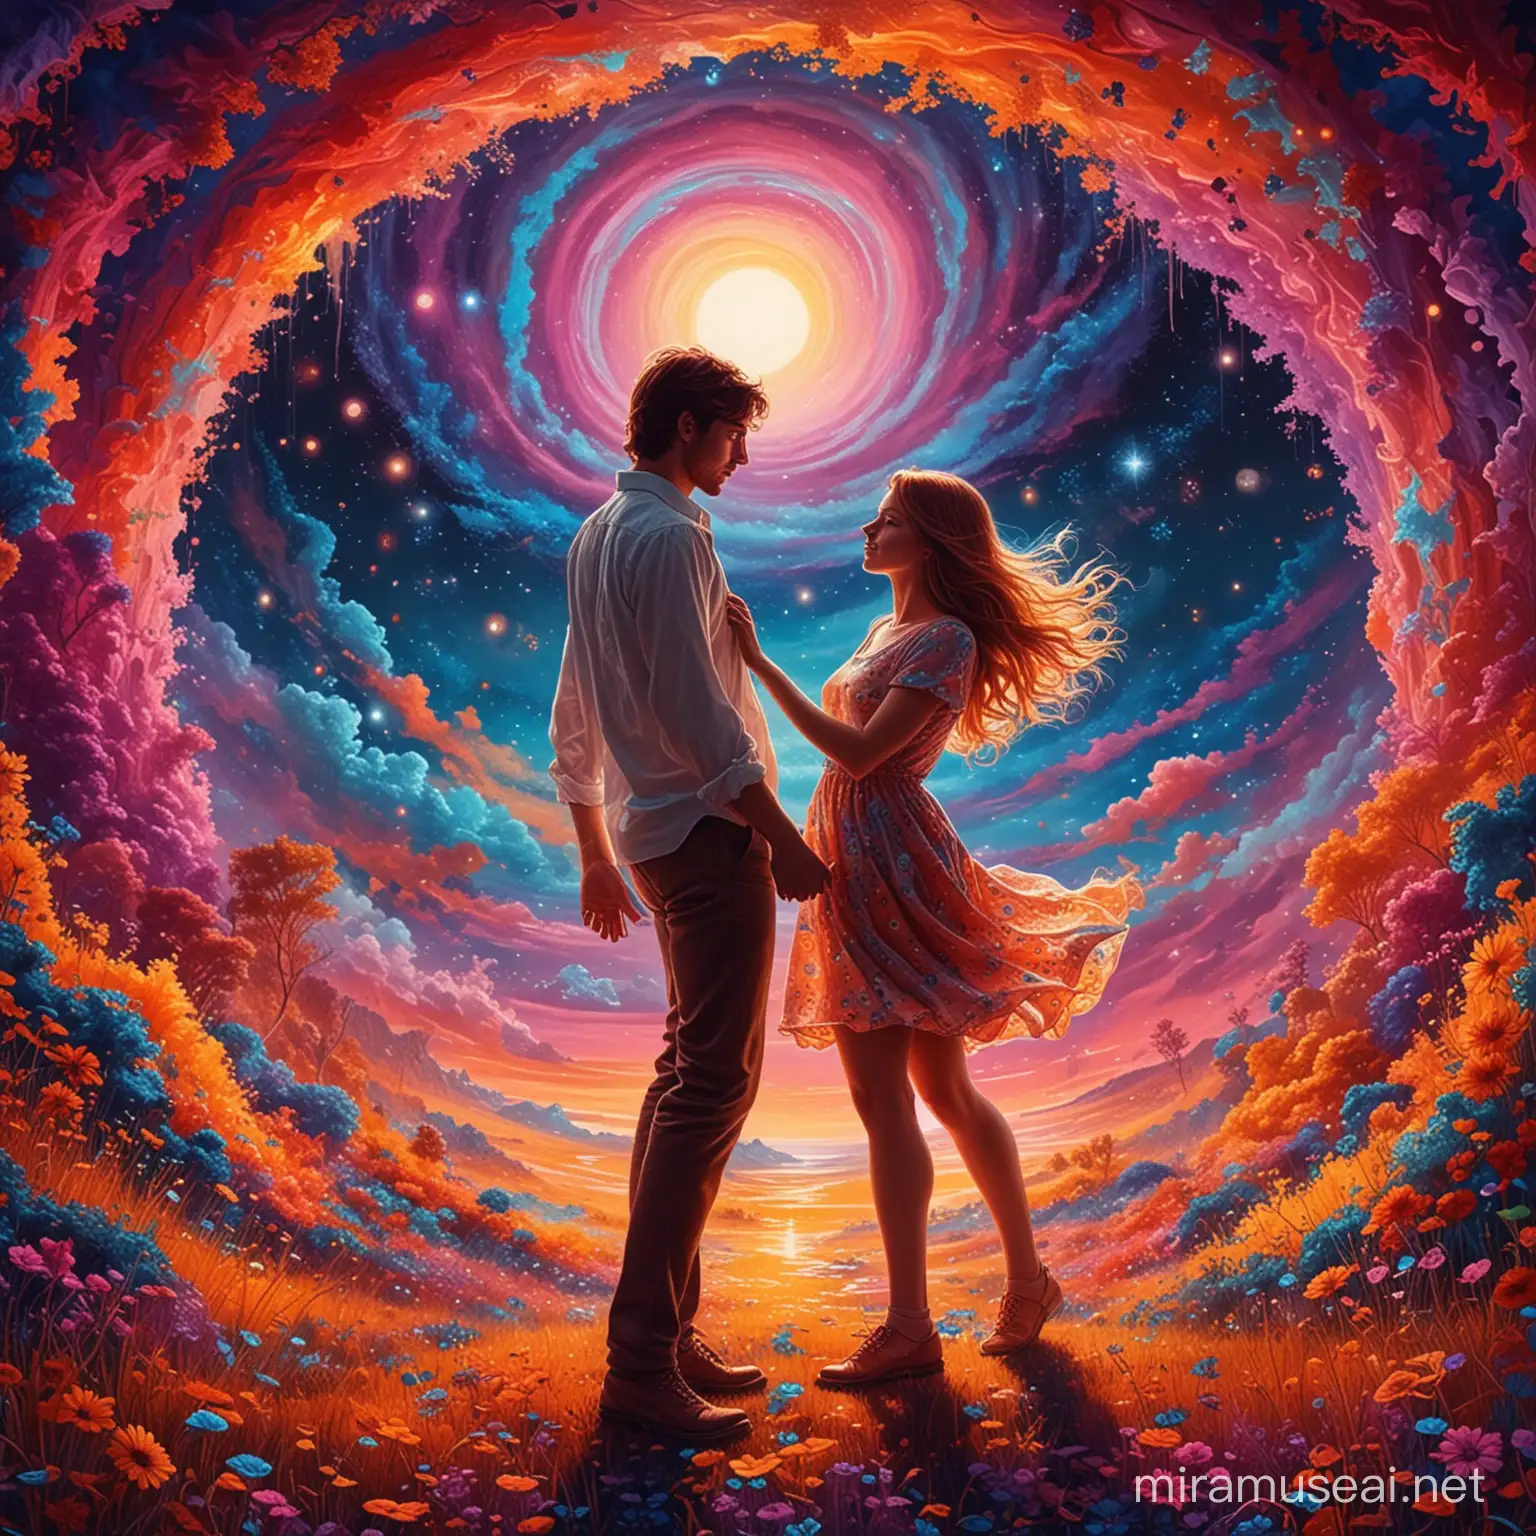 Psychedelic Dream Dance Vibrant Boy and Girl in Romantic Setting